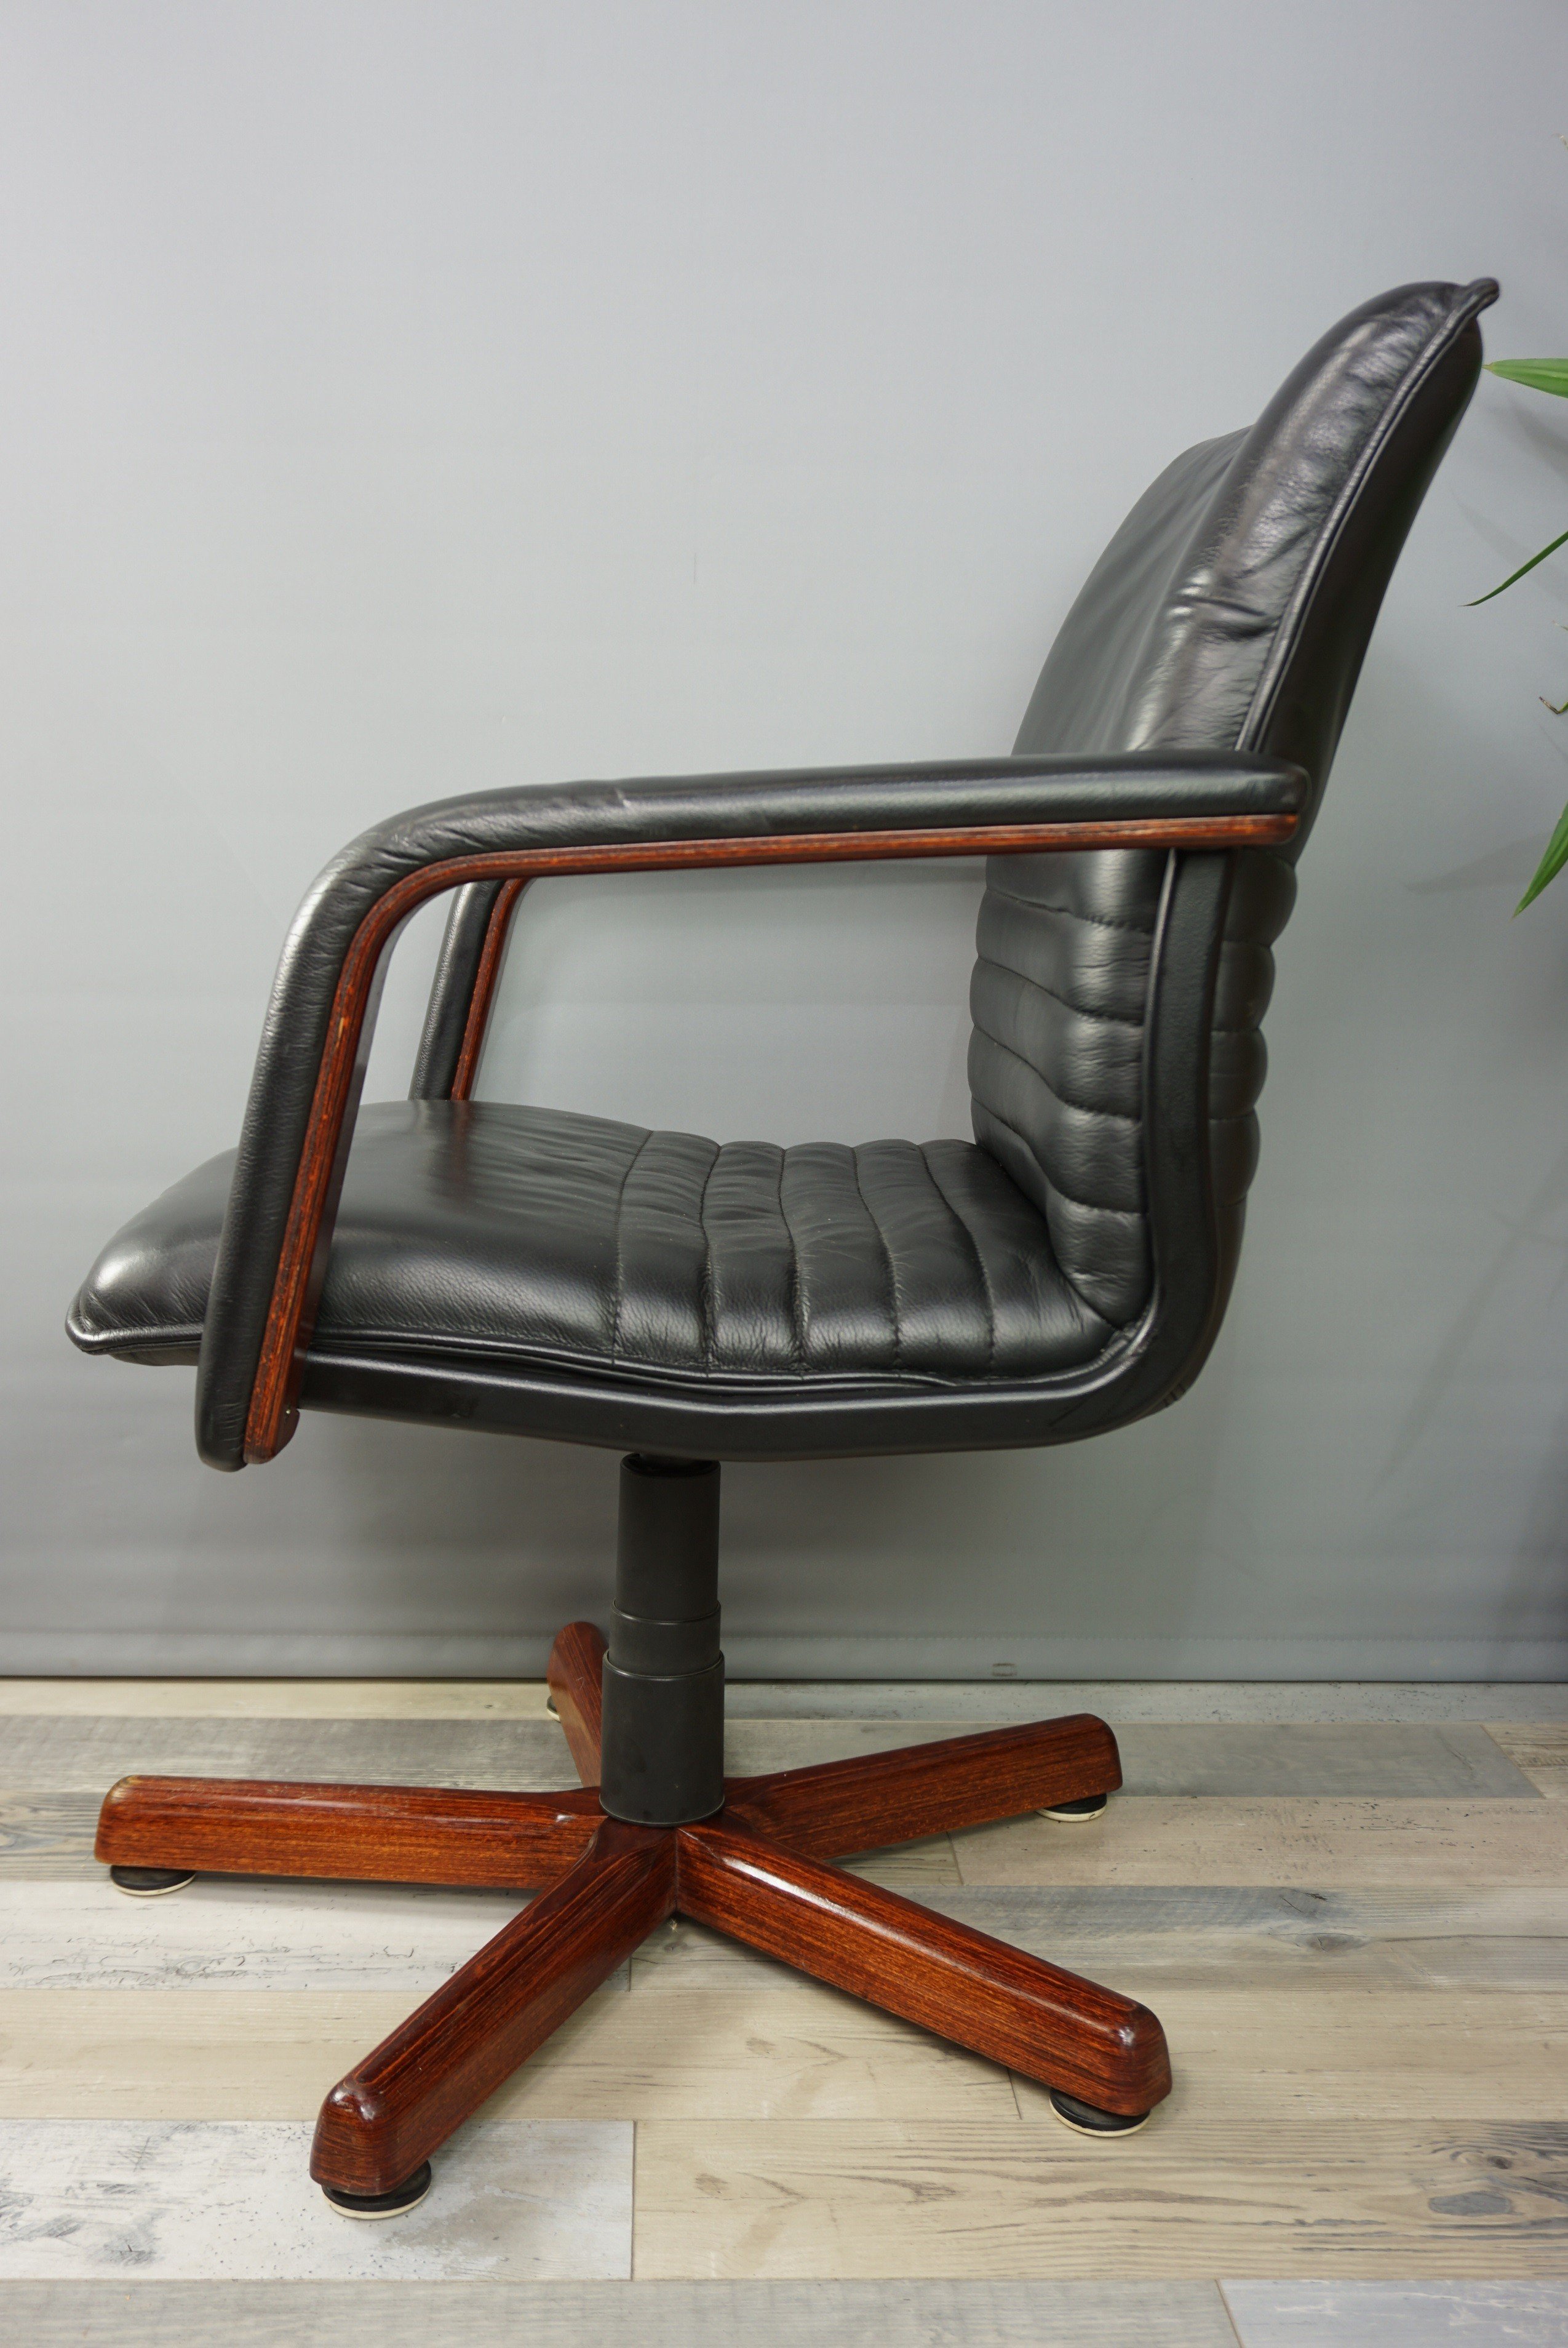 Vintage swivel office chair in wood and leather - 1960s - Design Market